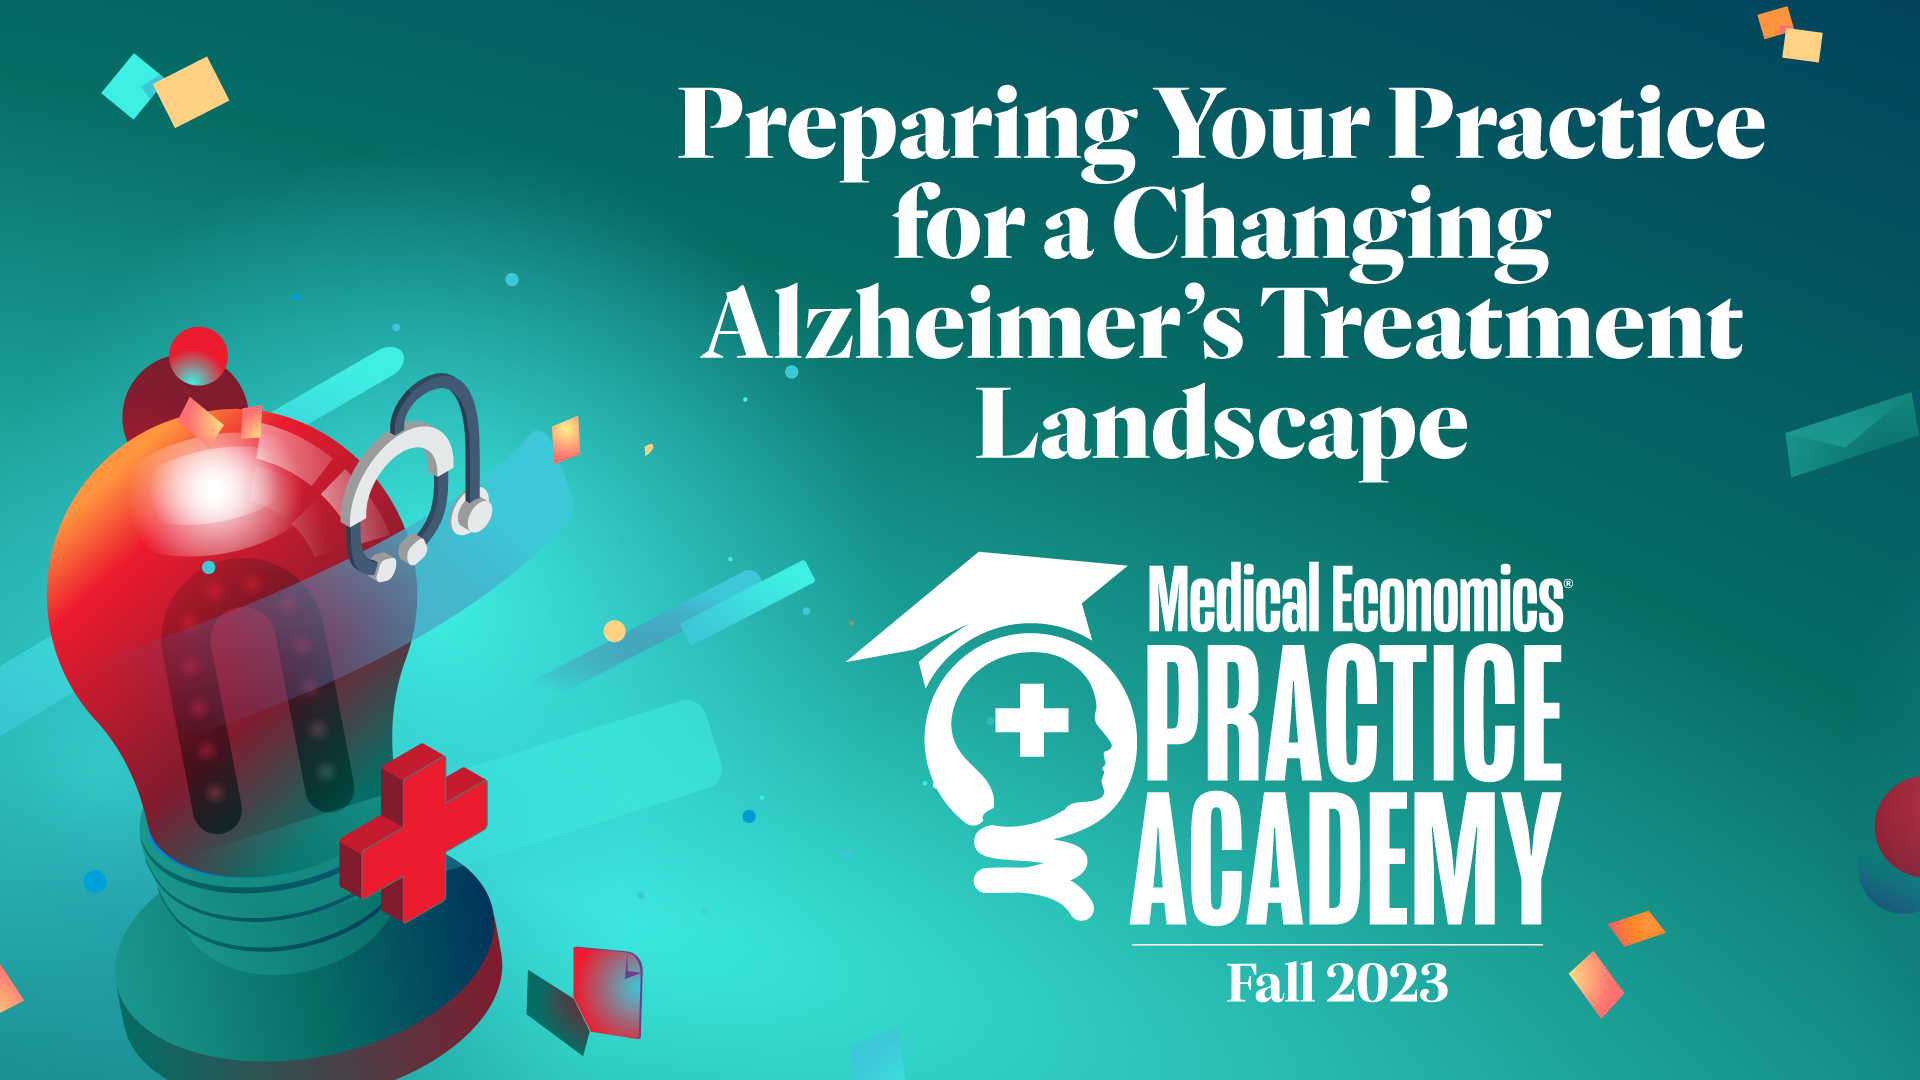 Preparing Your Practice for a Changing Alzheimer’s Treatment Landscape